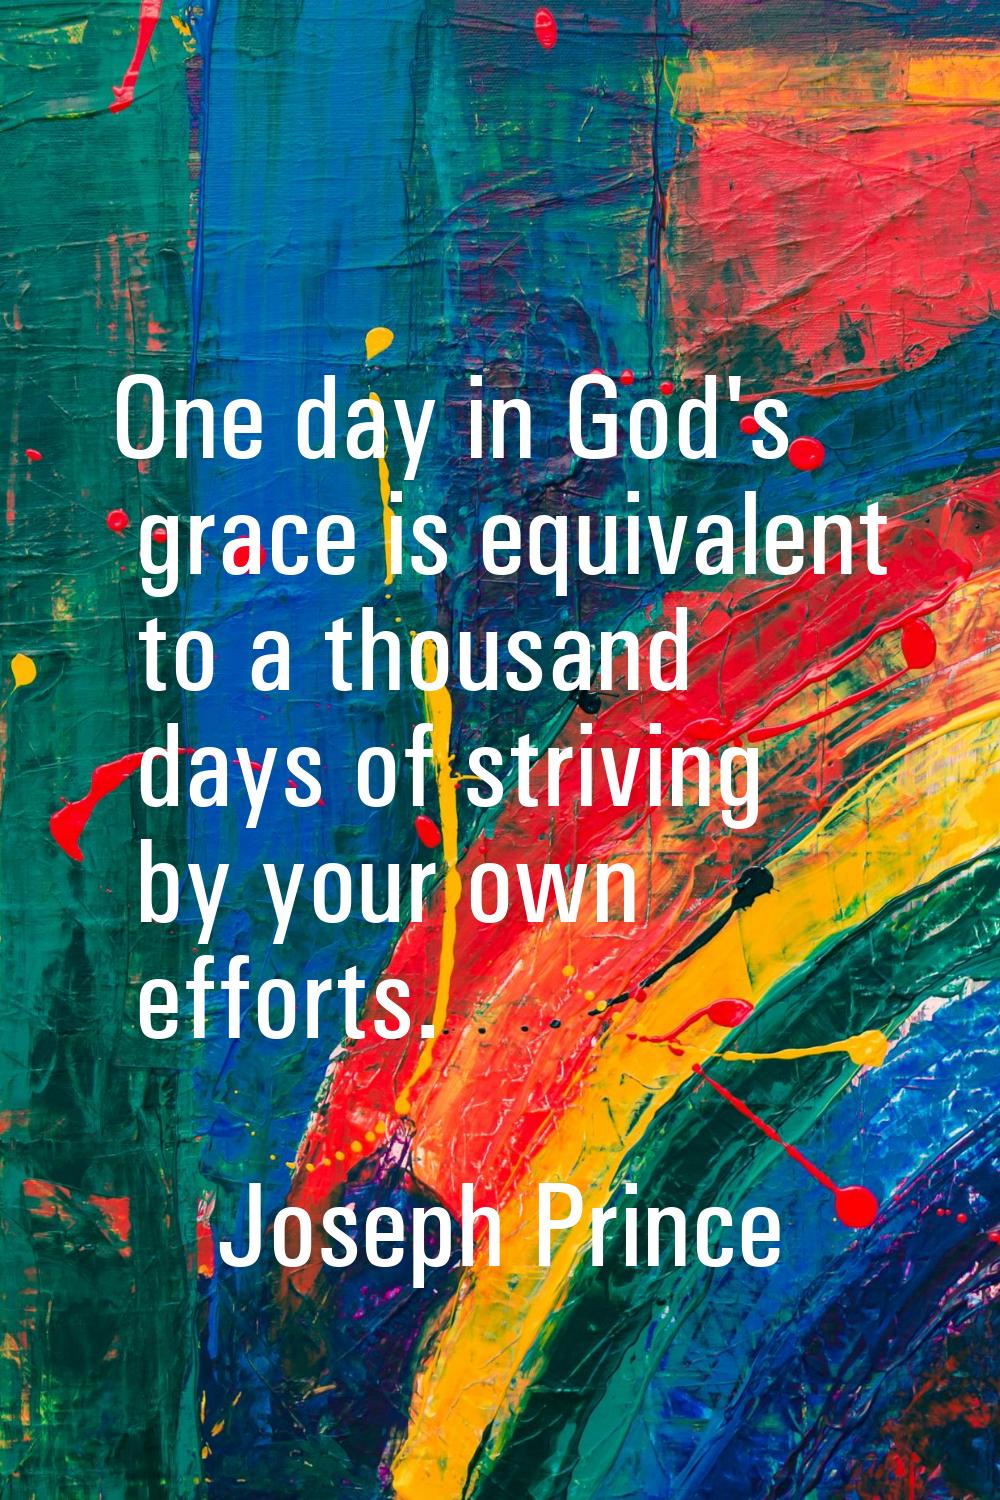 One day in God's grace is equivalent to a thousand days of striving by your own efforts.